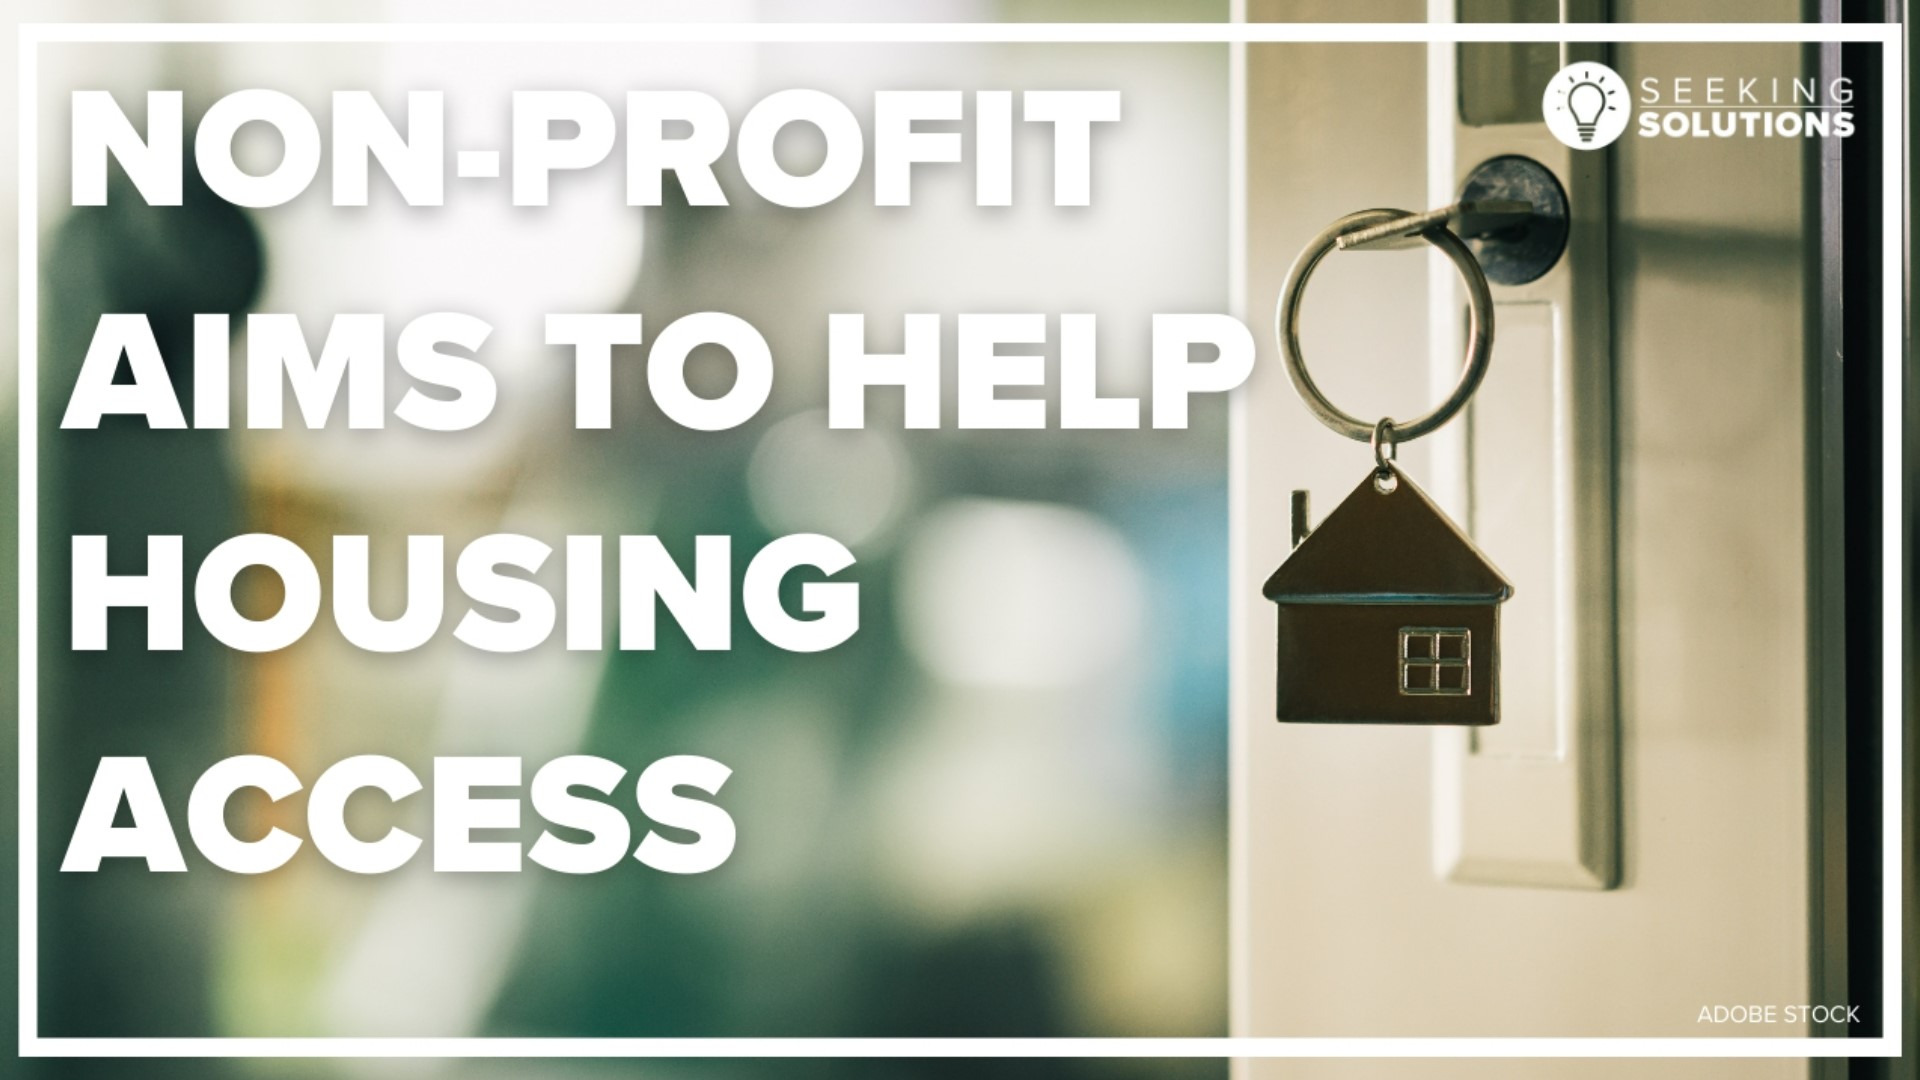 Housing Collaborative offers financial incentives and assistance to landlords, with the goal of helping people who are trying to start over.